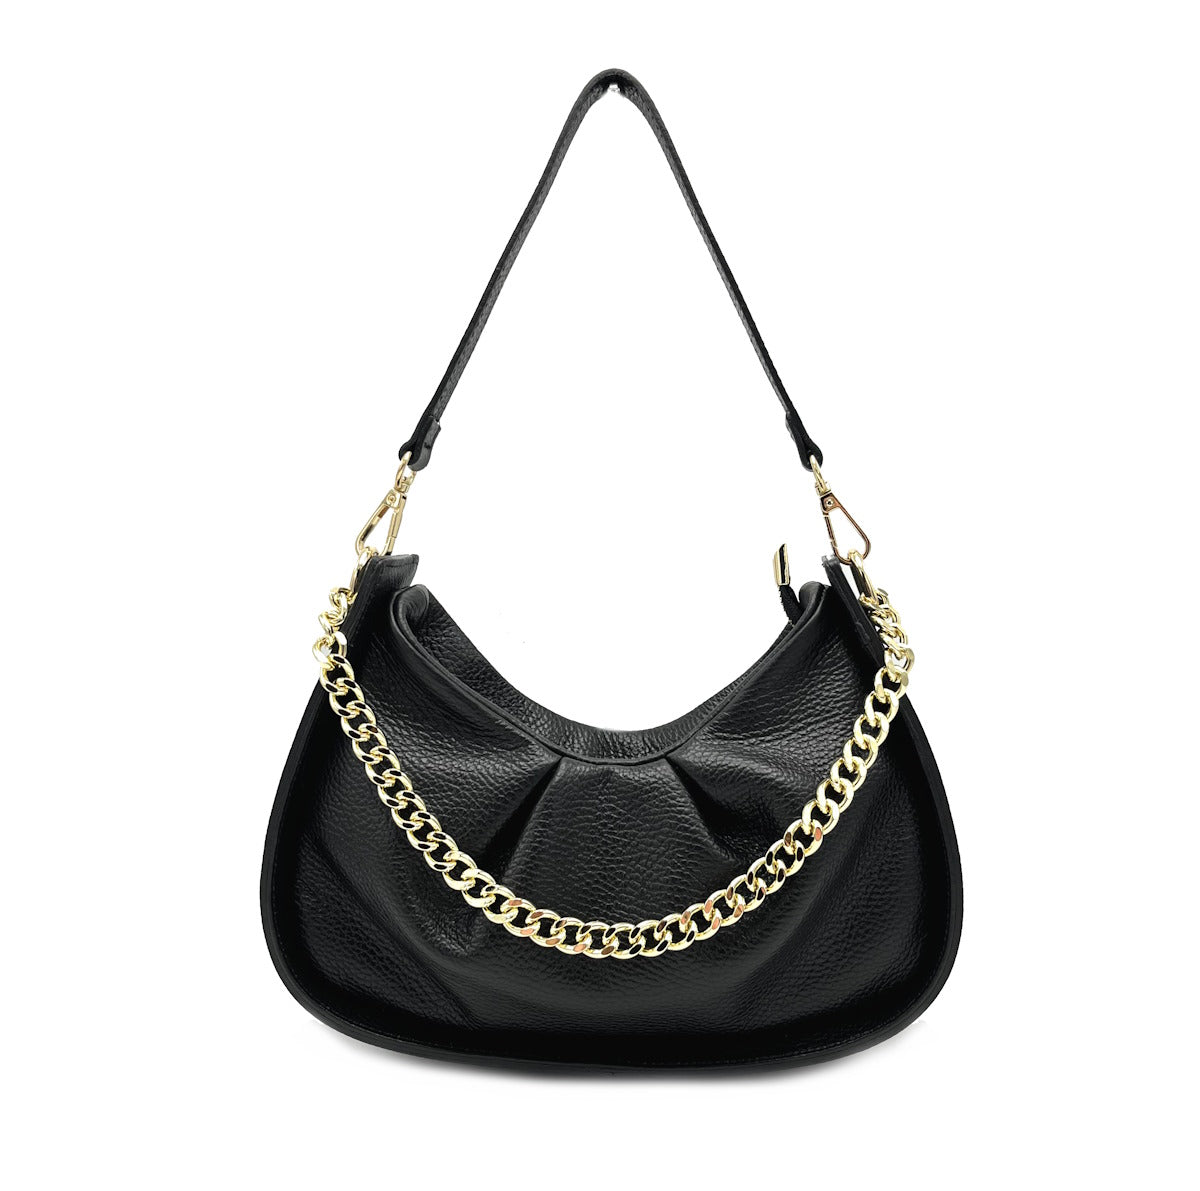 Genuine leather chain bag, for women, made in Italy, art. 112440